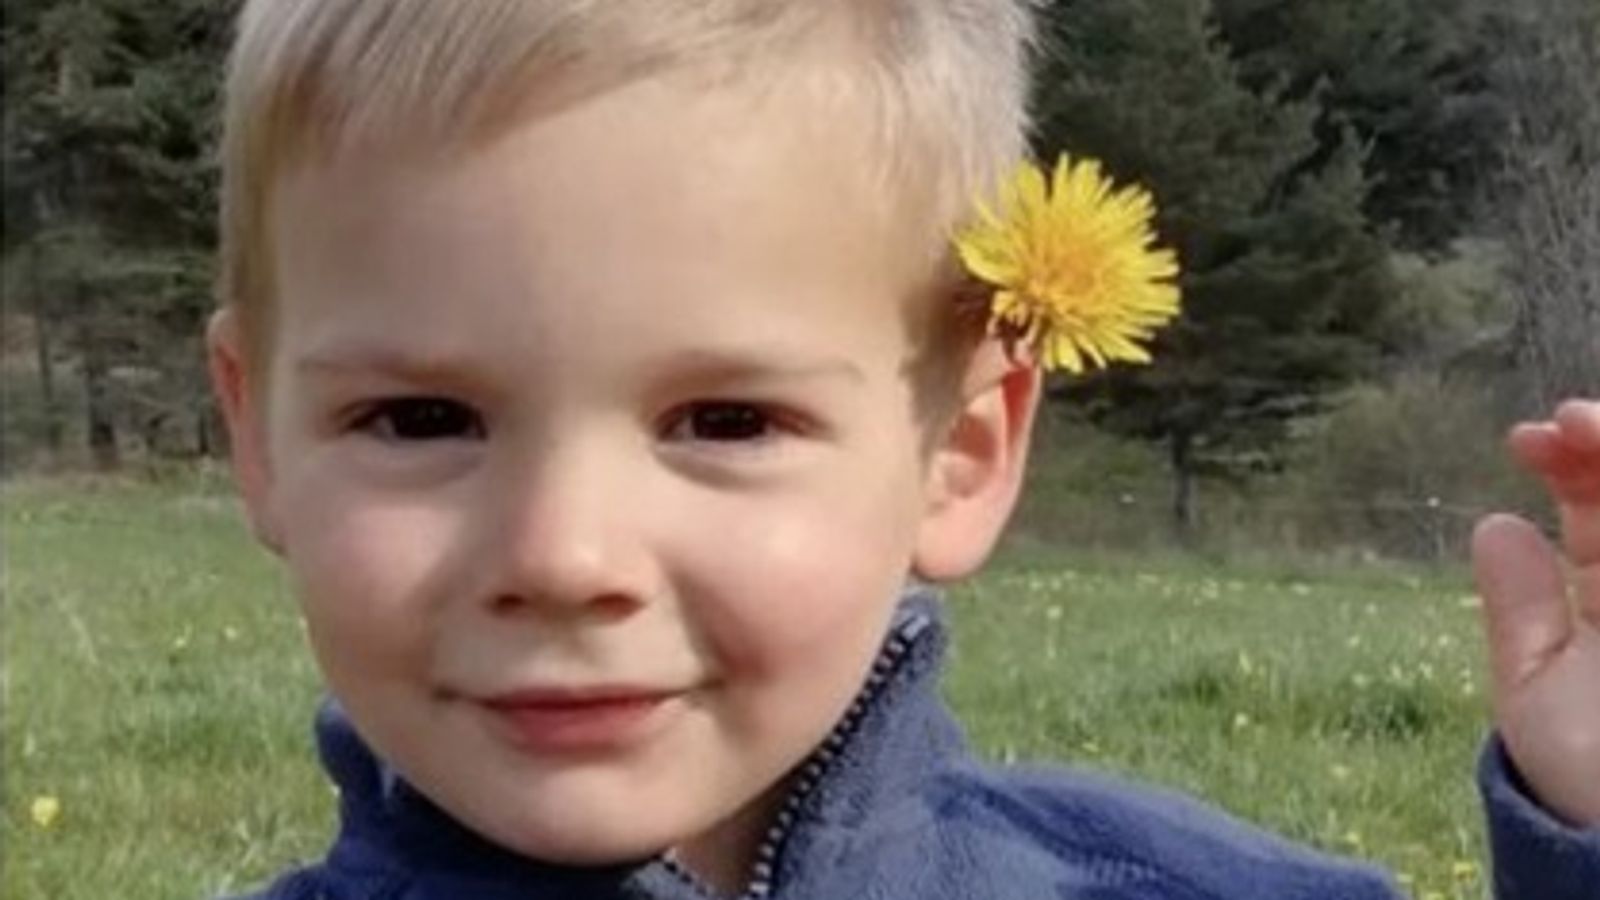 Emile: Clothes belonging to boy missing in French Alps since July found - days after remains discovered